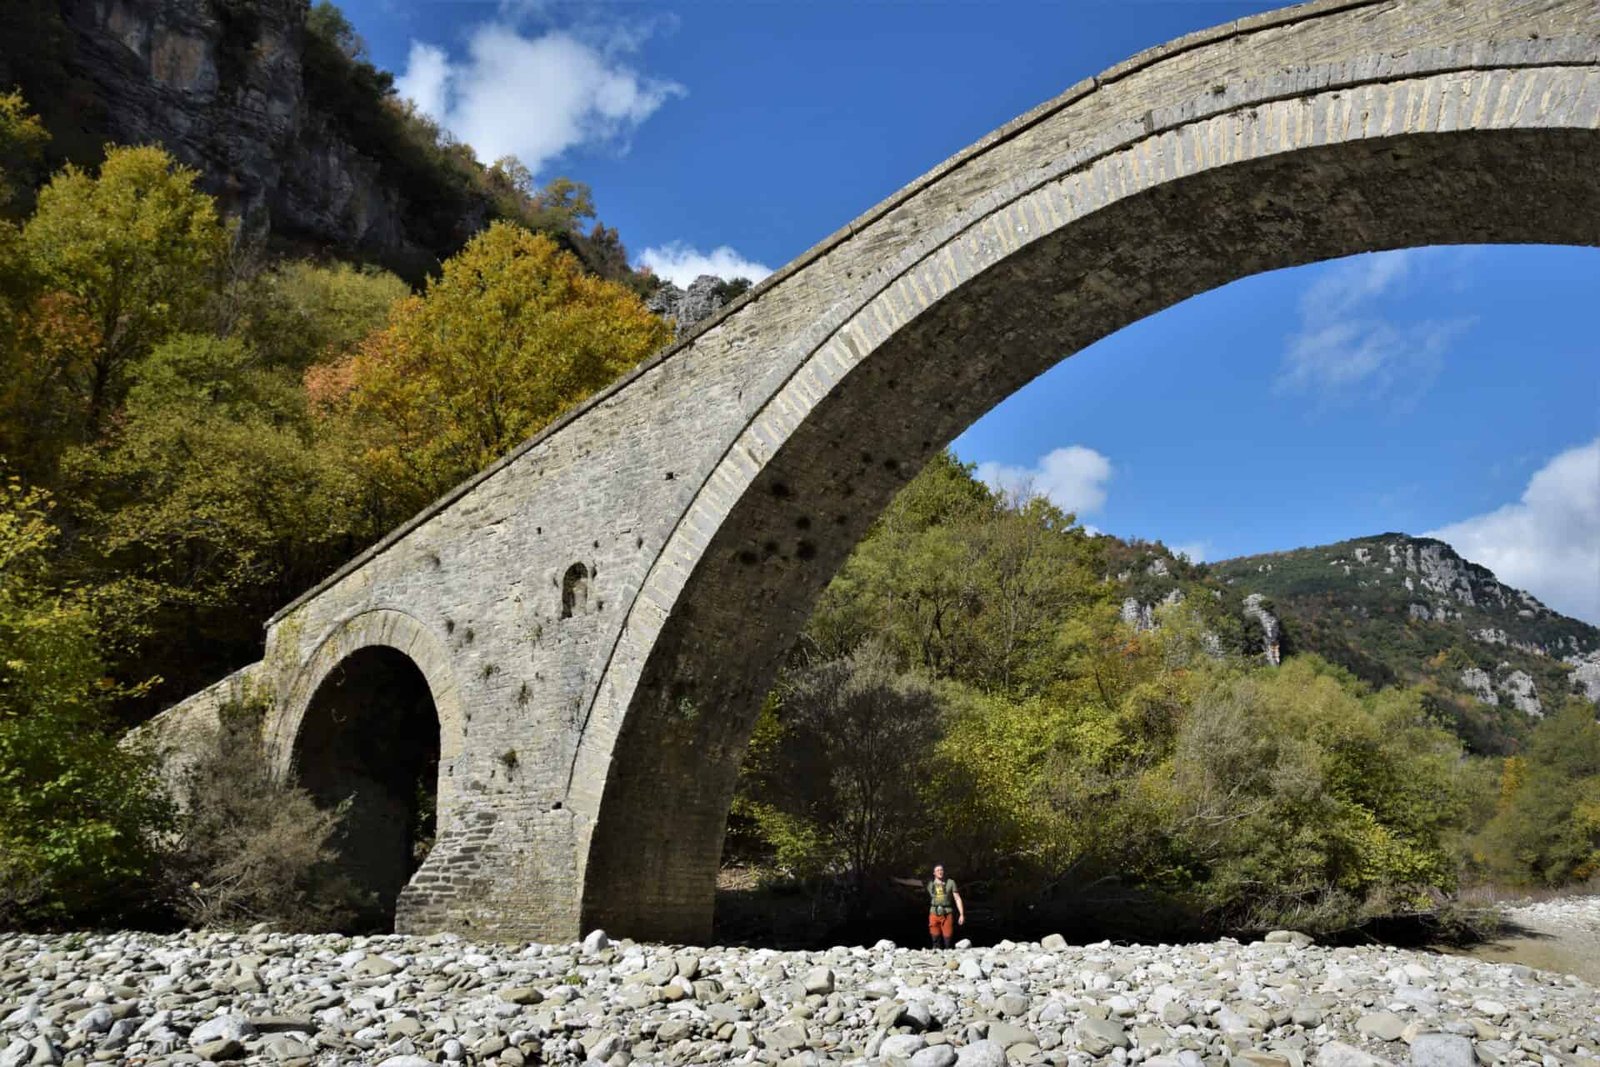 a hiker, wearing red trousers and a green shirt, stands beneath a large stone bridge arching across a dry riverbed in a canyon